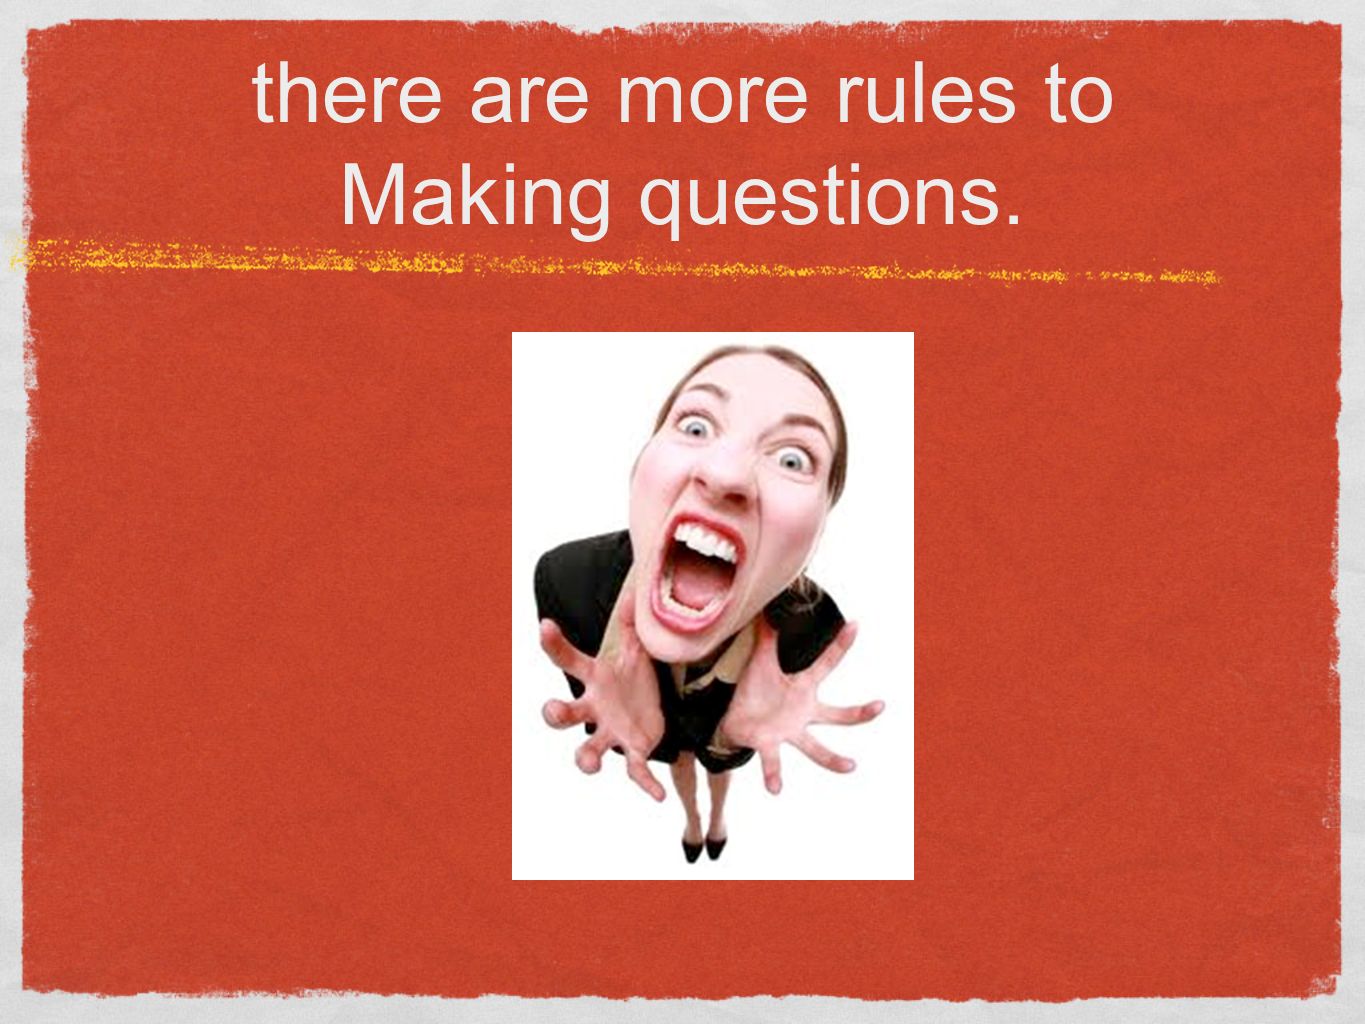 there are more rules to Making questions.